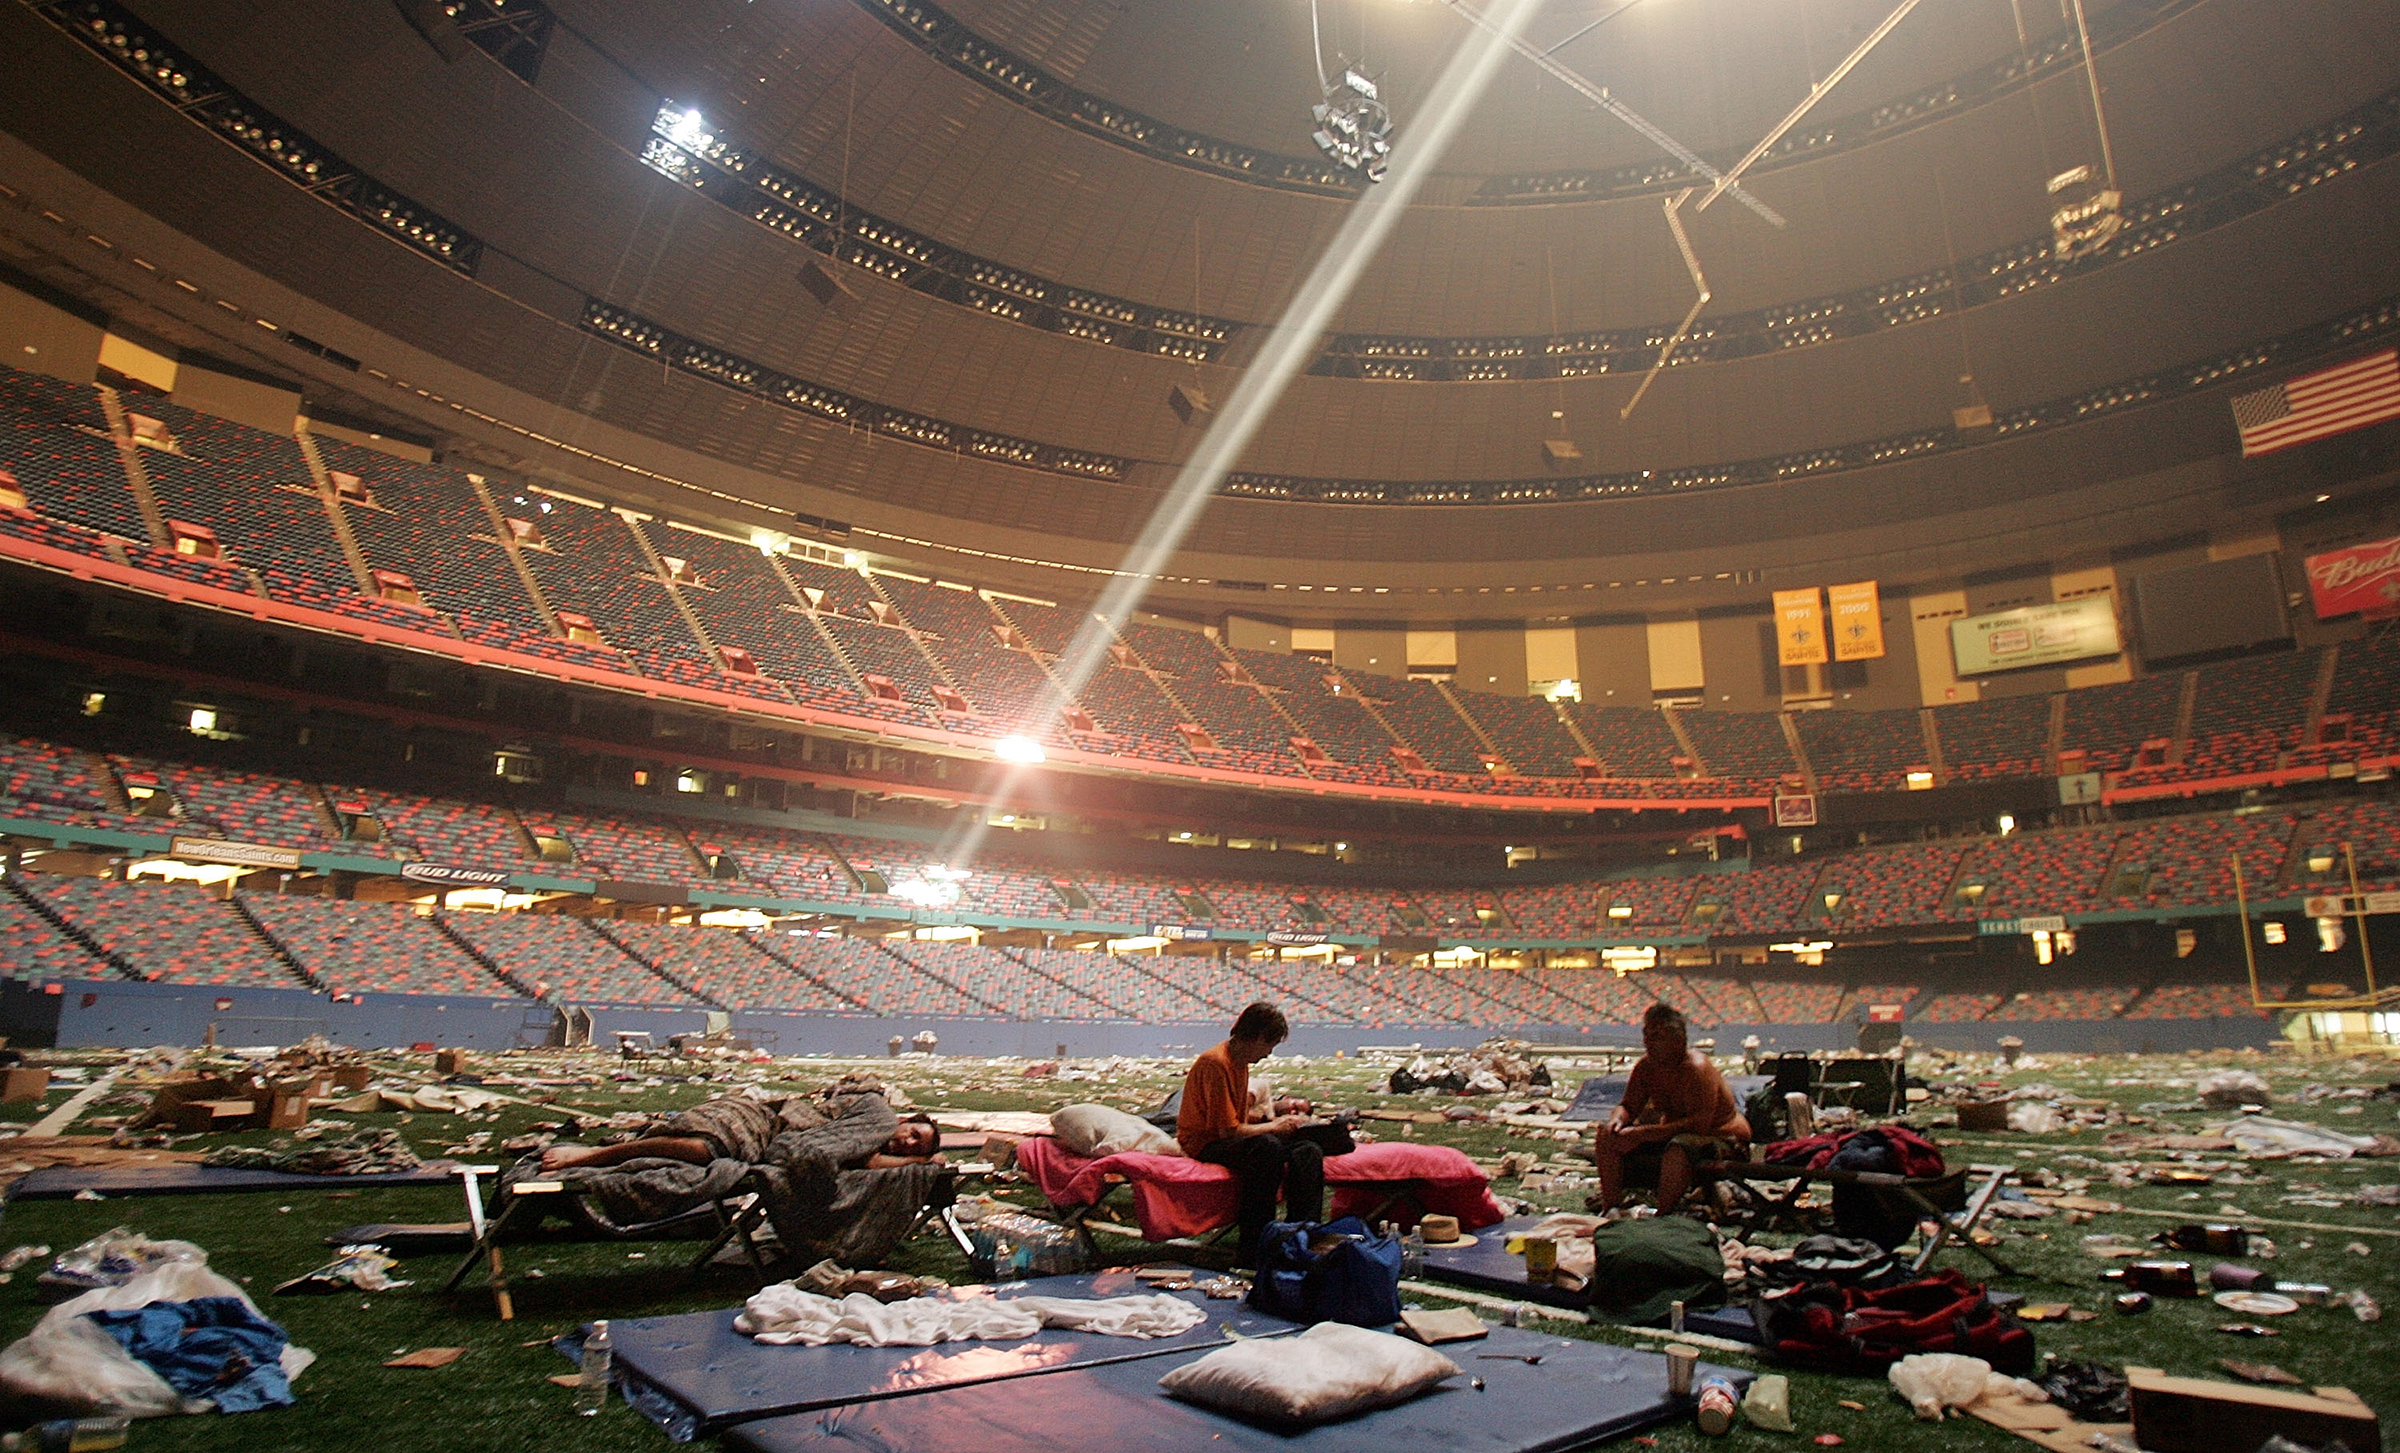 Stranded victims of Hurricane Katrina rest inside the Superdome on Sept. 2, 2005 in New Orleans. (Mario Tama—Getty Images)